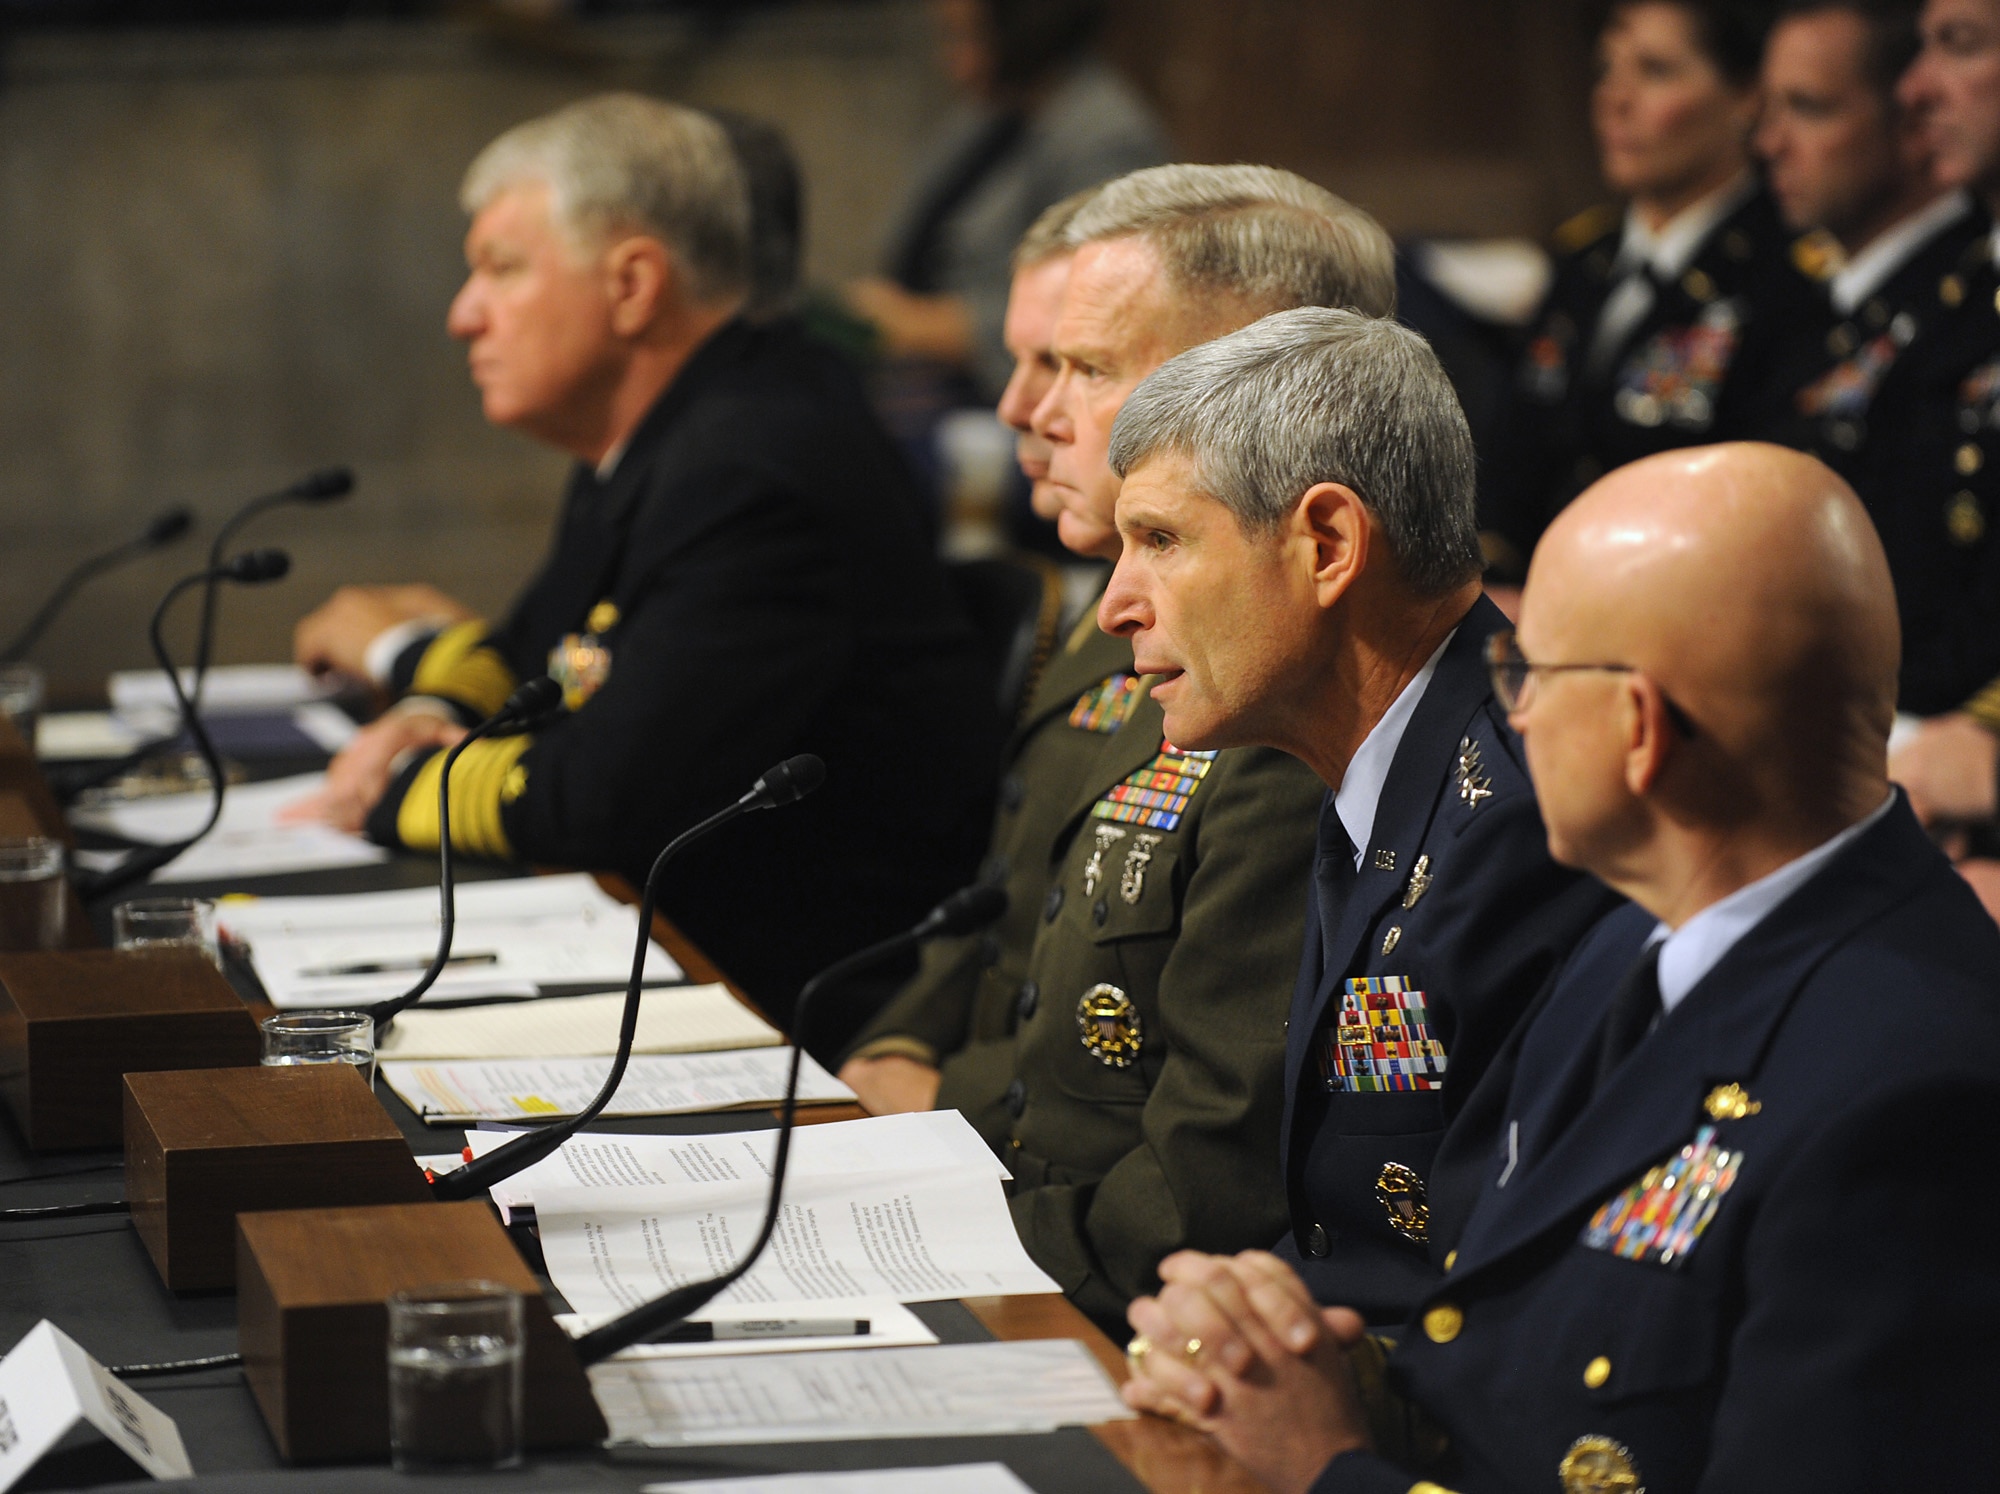 Air Force Chief of Staff Gen. Norton Schwartz testifies before the Senate Armed Services Committee Dec. 3, 2010, in Washington, D.C. General Schwartz, his fellow service chiefs and the vice chairman of the Joint Chiefs of Staff testified on the recently released Comprehensive Review Working Group report, which addresses the potential repeal of the "Don't Ask, Don't Tell" law. (U.S. Air Force photo/Scott M. Ash)